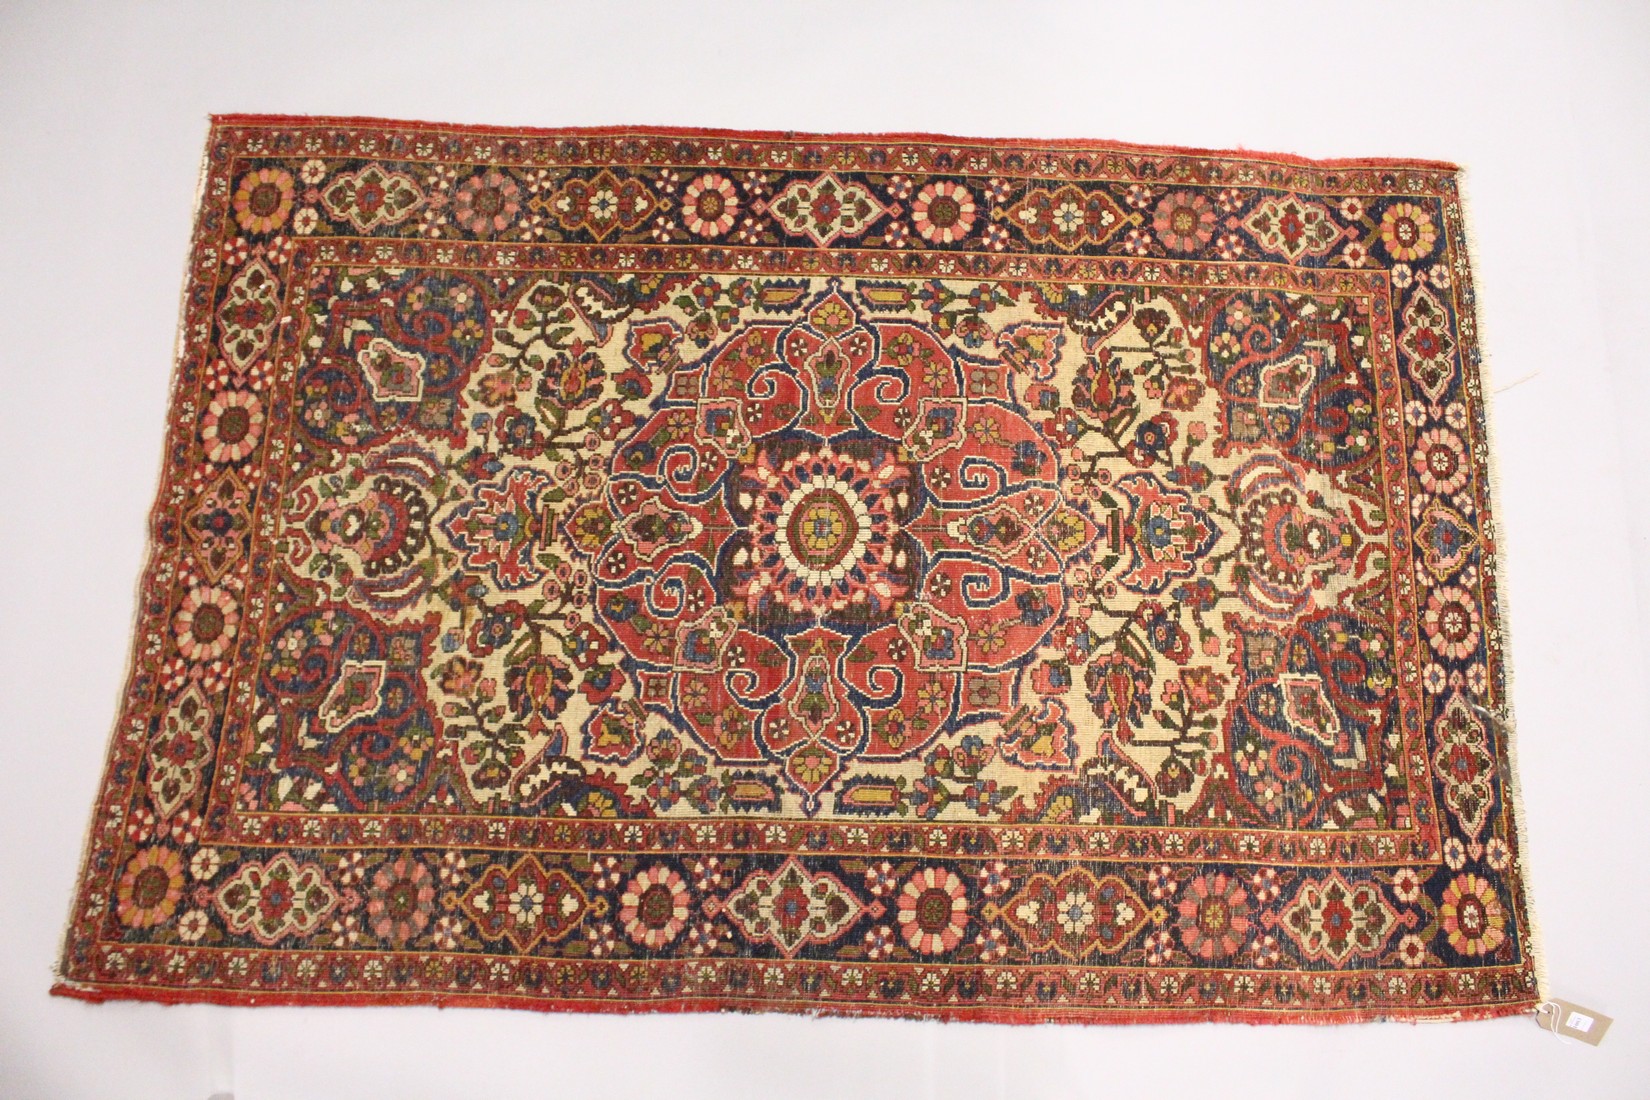 A PERSIAN BAKHTIAR CARPET, cream ground with all over floral design. 6ft 8ins x 4ft 4ins - Image 2 of 2